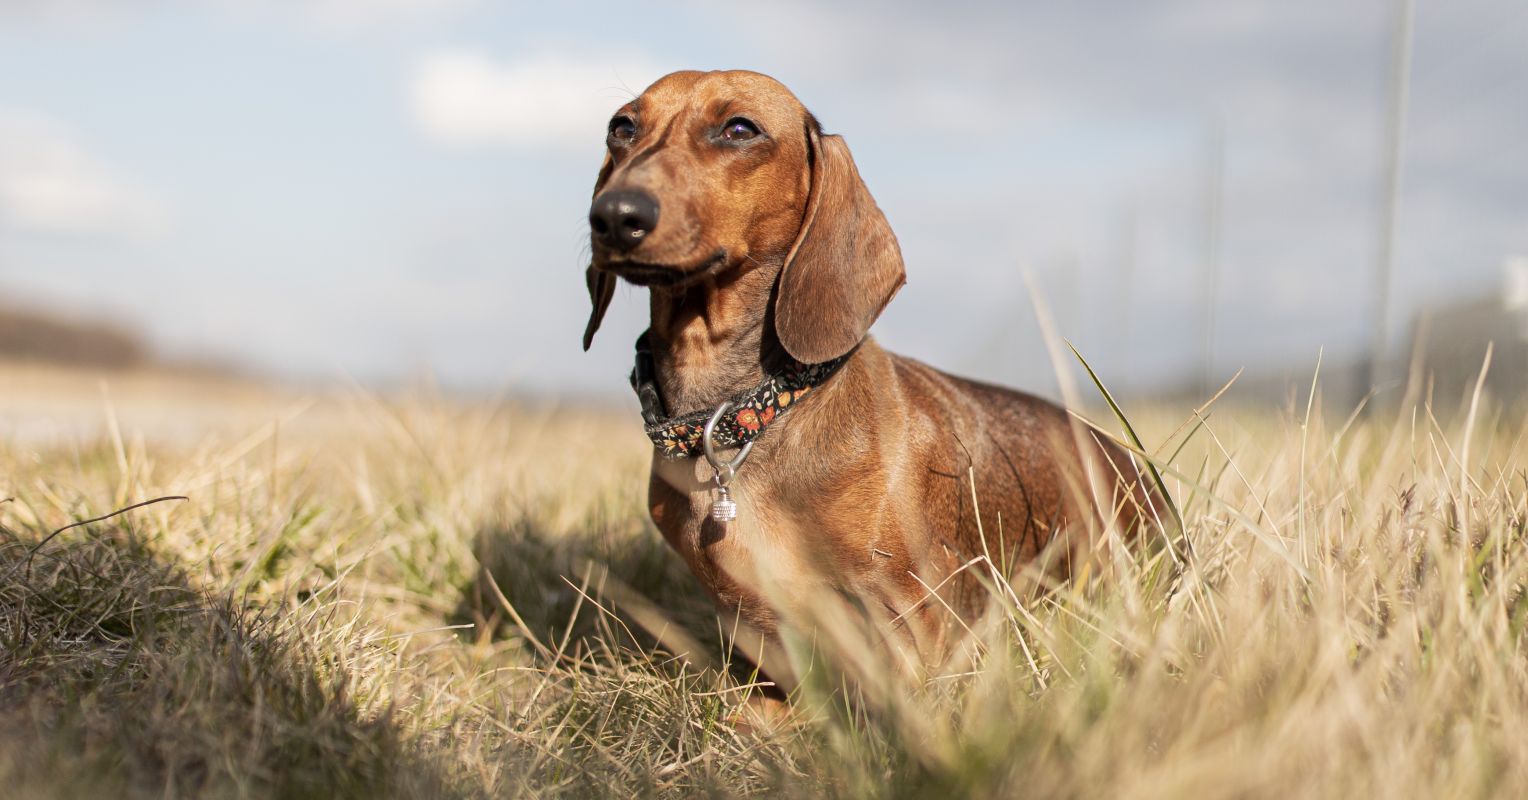 Can Pet Dogs Experience Freedom? | Psychology Today